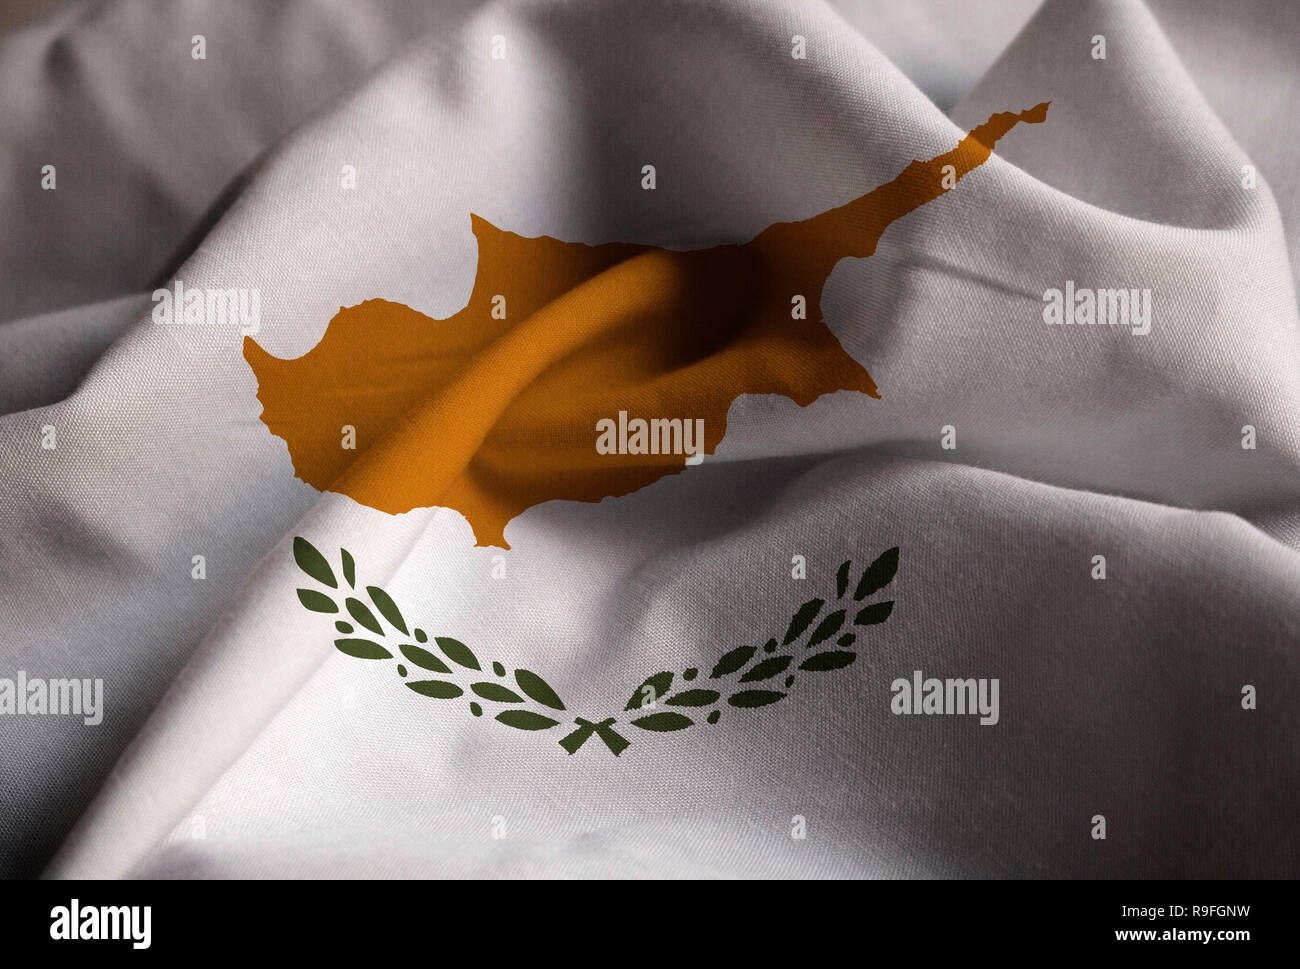 Closeup of Ruffled Cyprus Flag, Cyprus Flag Blowing in Wind Stock Photo